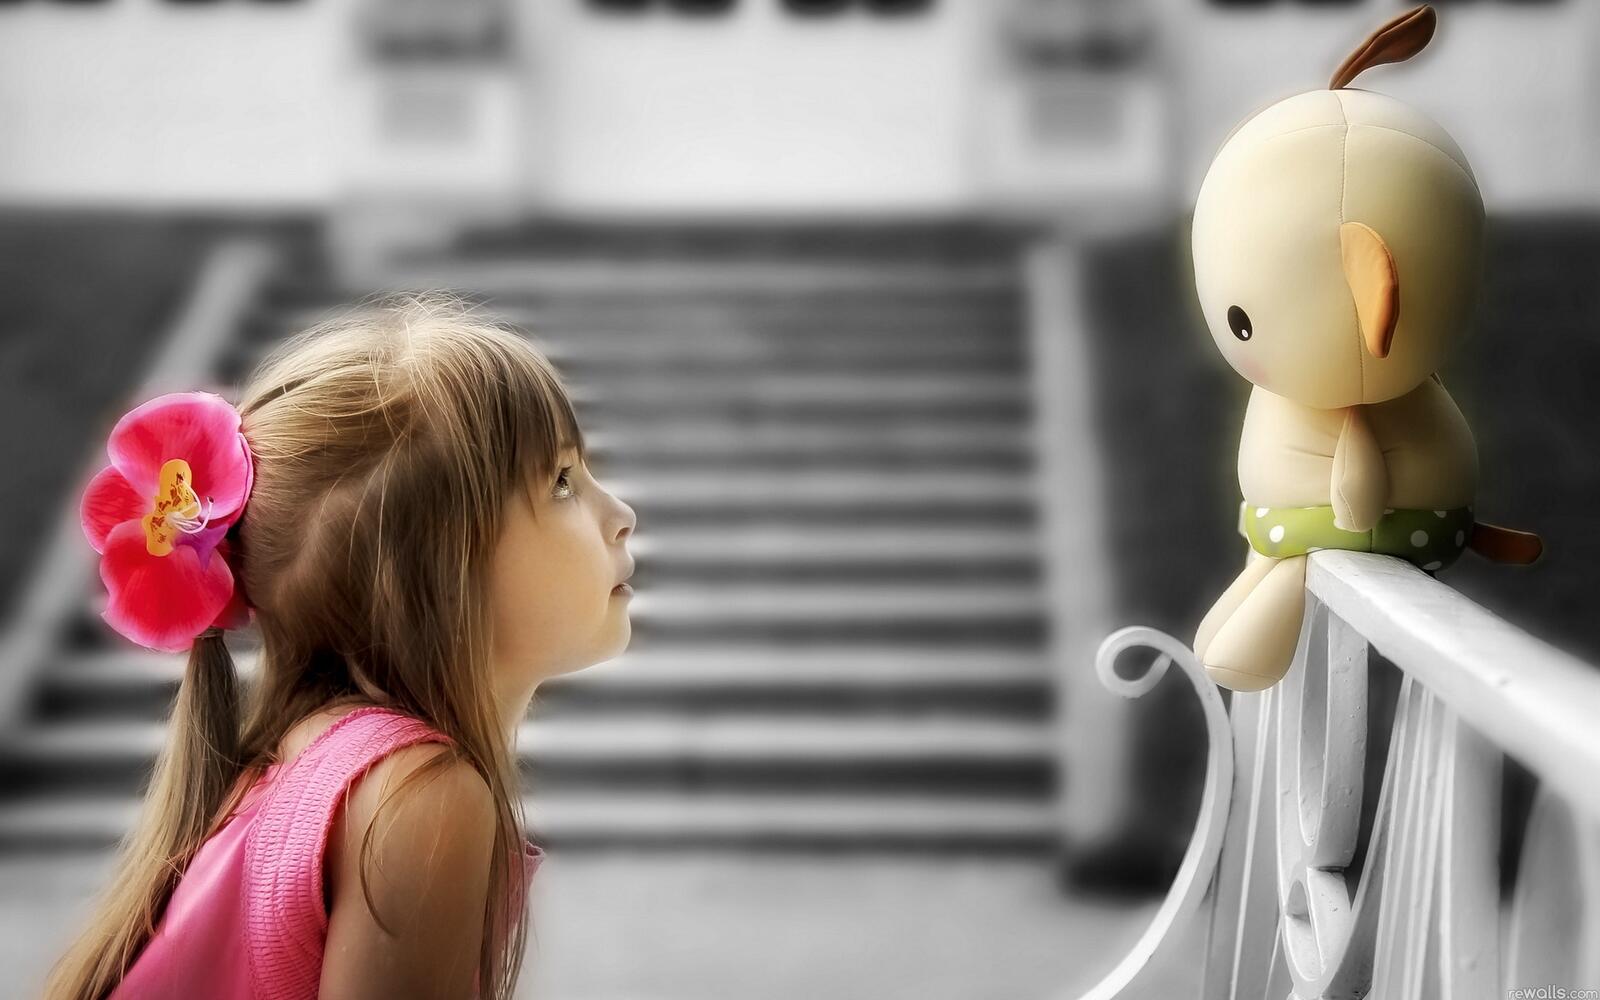 Free photo A little girl looks at a soft toy